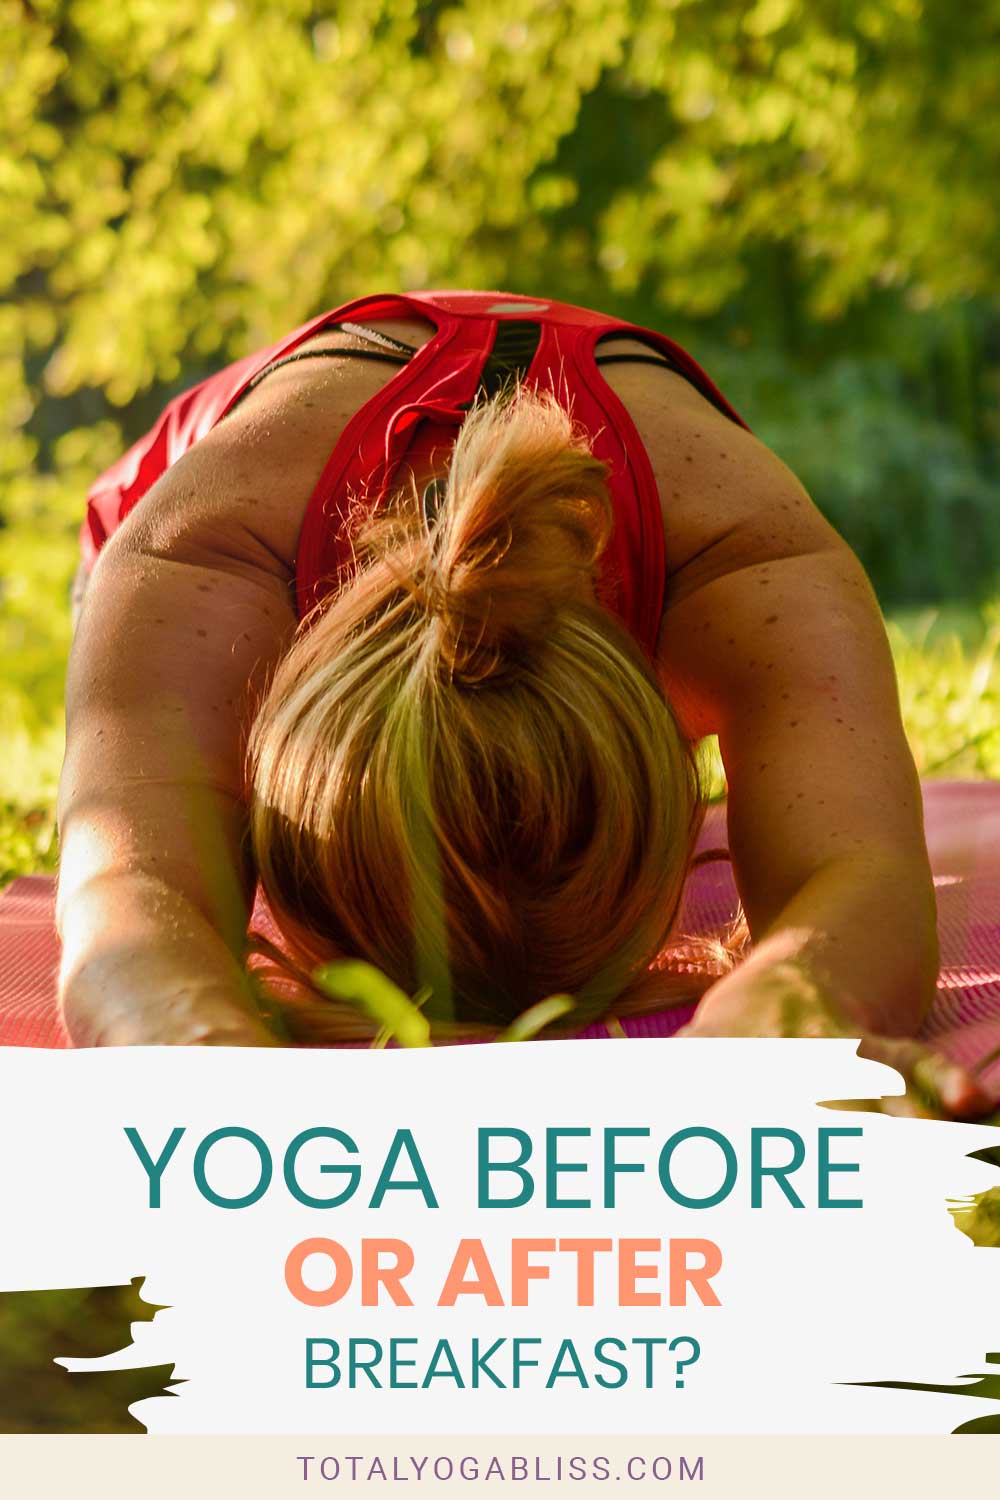 Yoga Before Or After Breakfast?